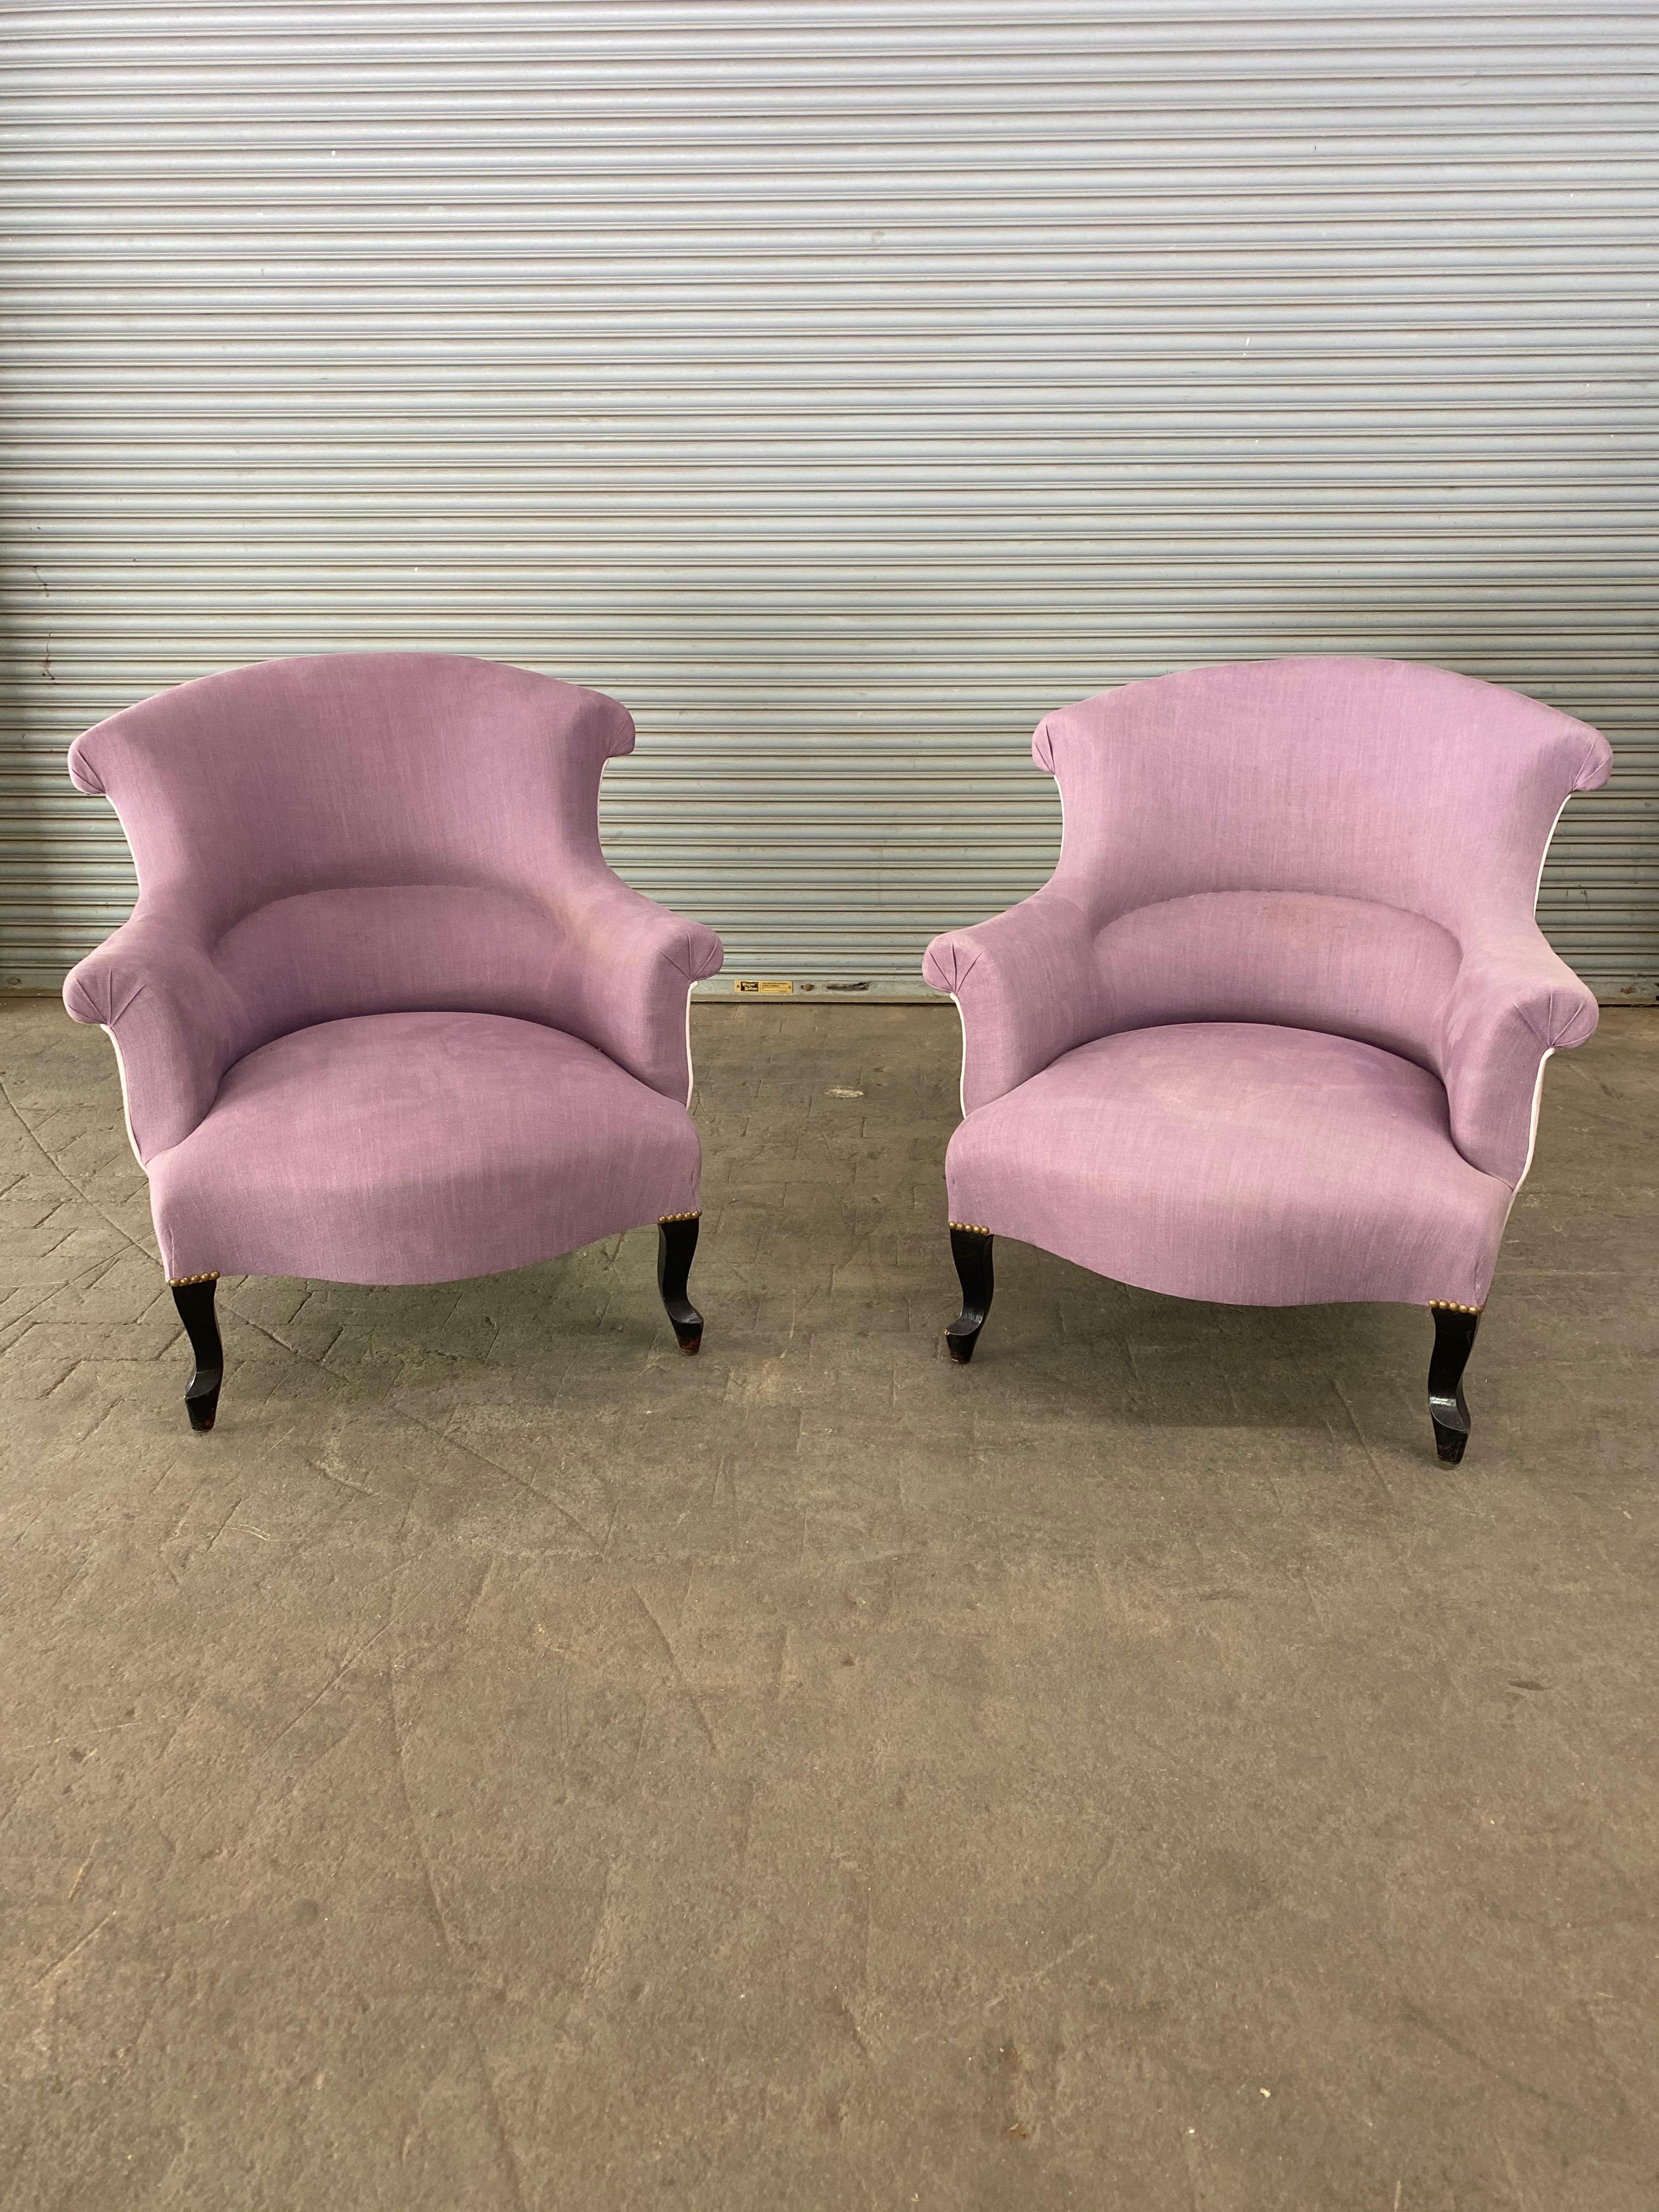 A pair of French 19th century Napoleon III armchairs upholstered in lavender linen with a contrasting back panel. The armchairs are in very good vintage condition, and while the upholstery is not new, the fabric is clean and can be used. Sold in